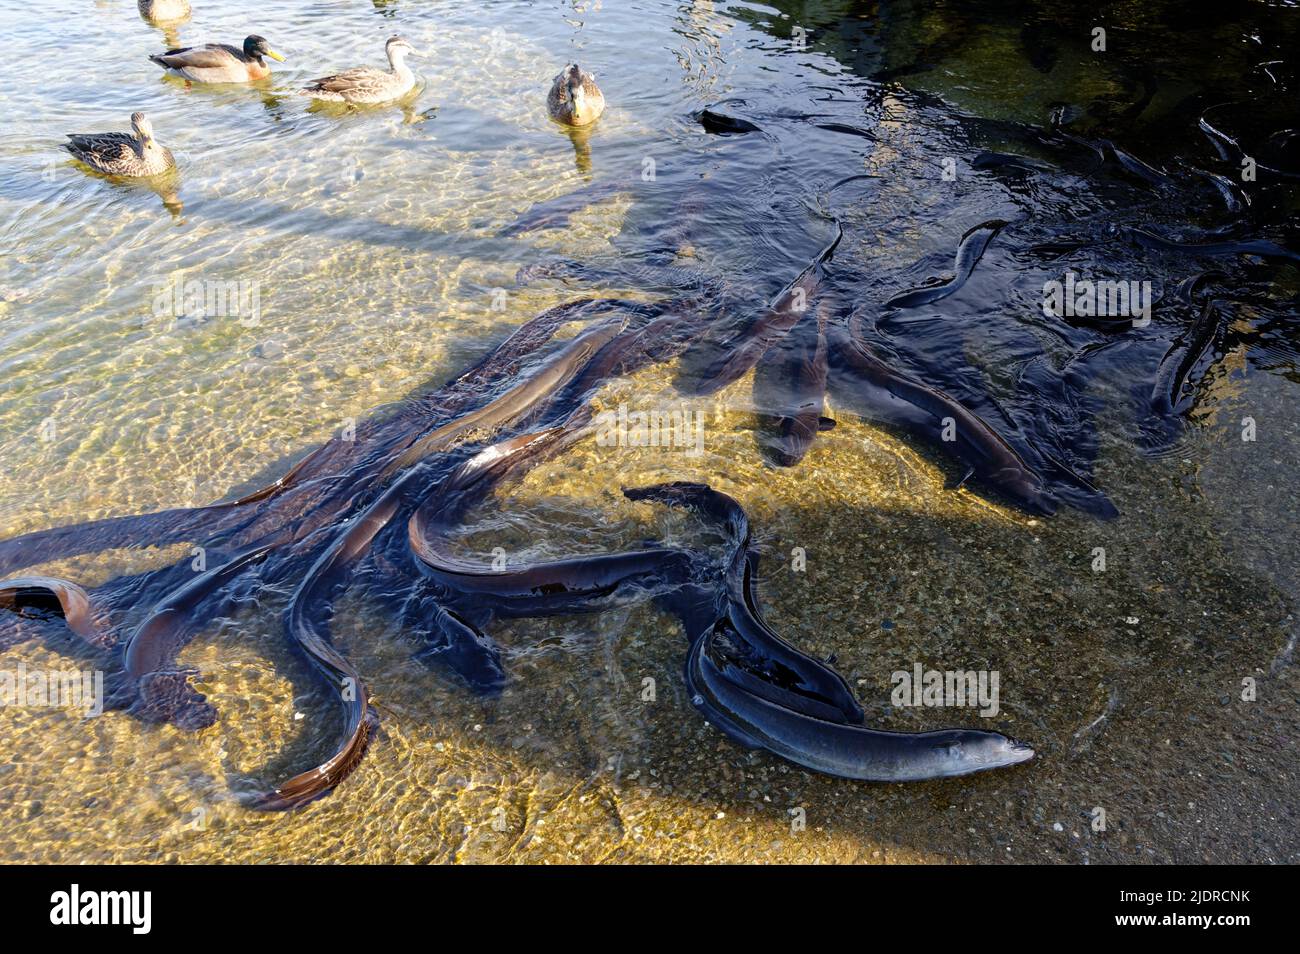 Longfin eels are endemic to New Zealand. These ones congreagate near a small jettey at Lake Rotoiti in Nelson Lakes in New Zealand Stock Photo